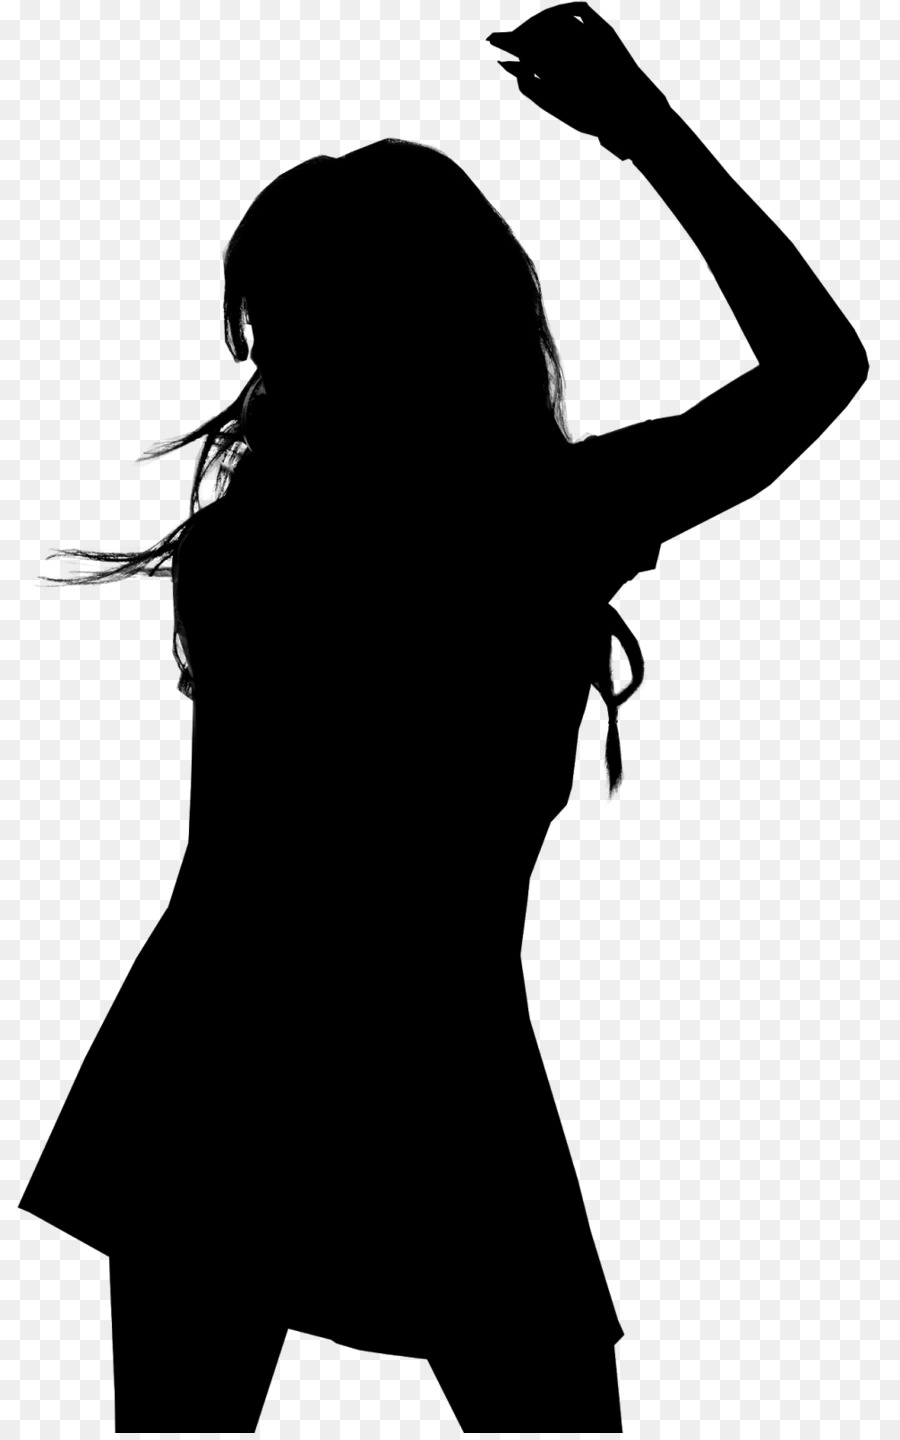 Image Illustration Royalty-free Silhouette Stock photography -  png download - 1005*1600 - Free Transparent Royaltyfree png Download.